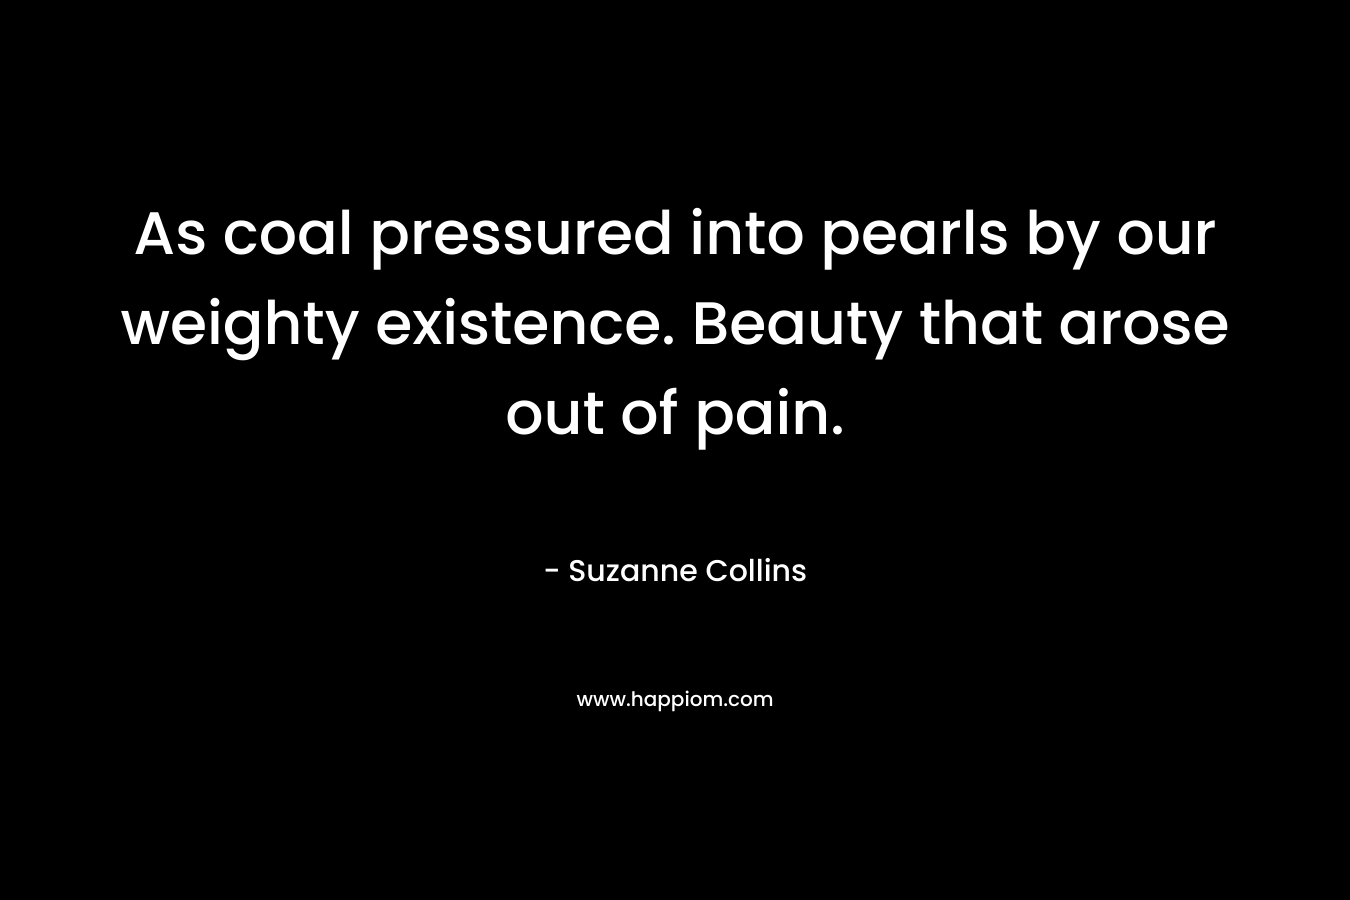 As coal pressured into pearls by our weighty existence. Beauty that arose out of pain.